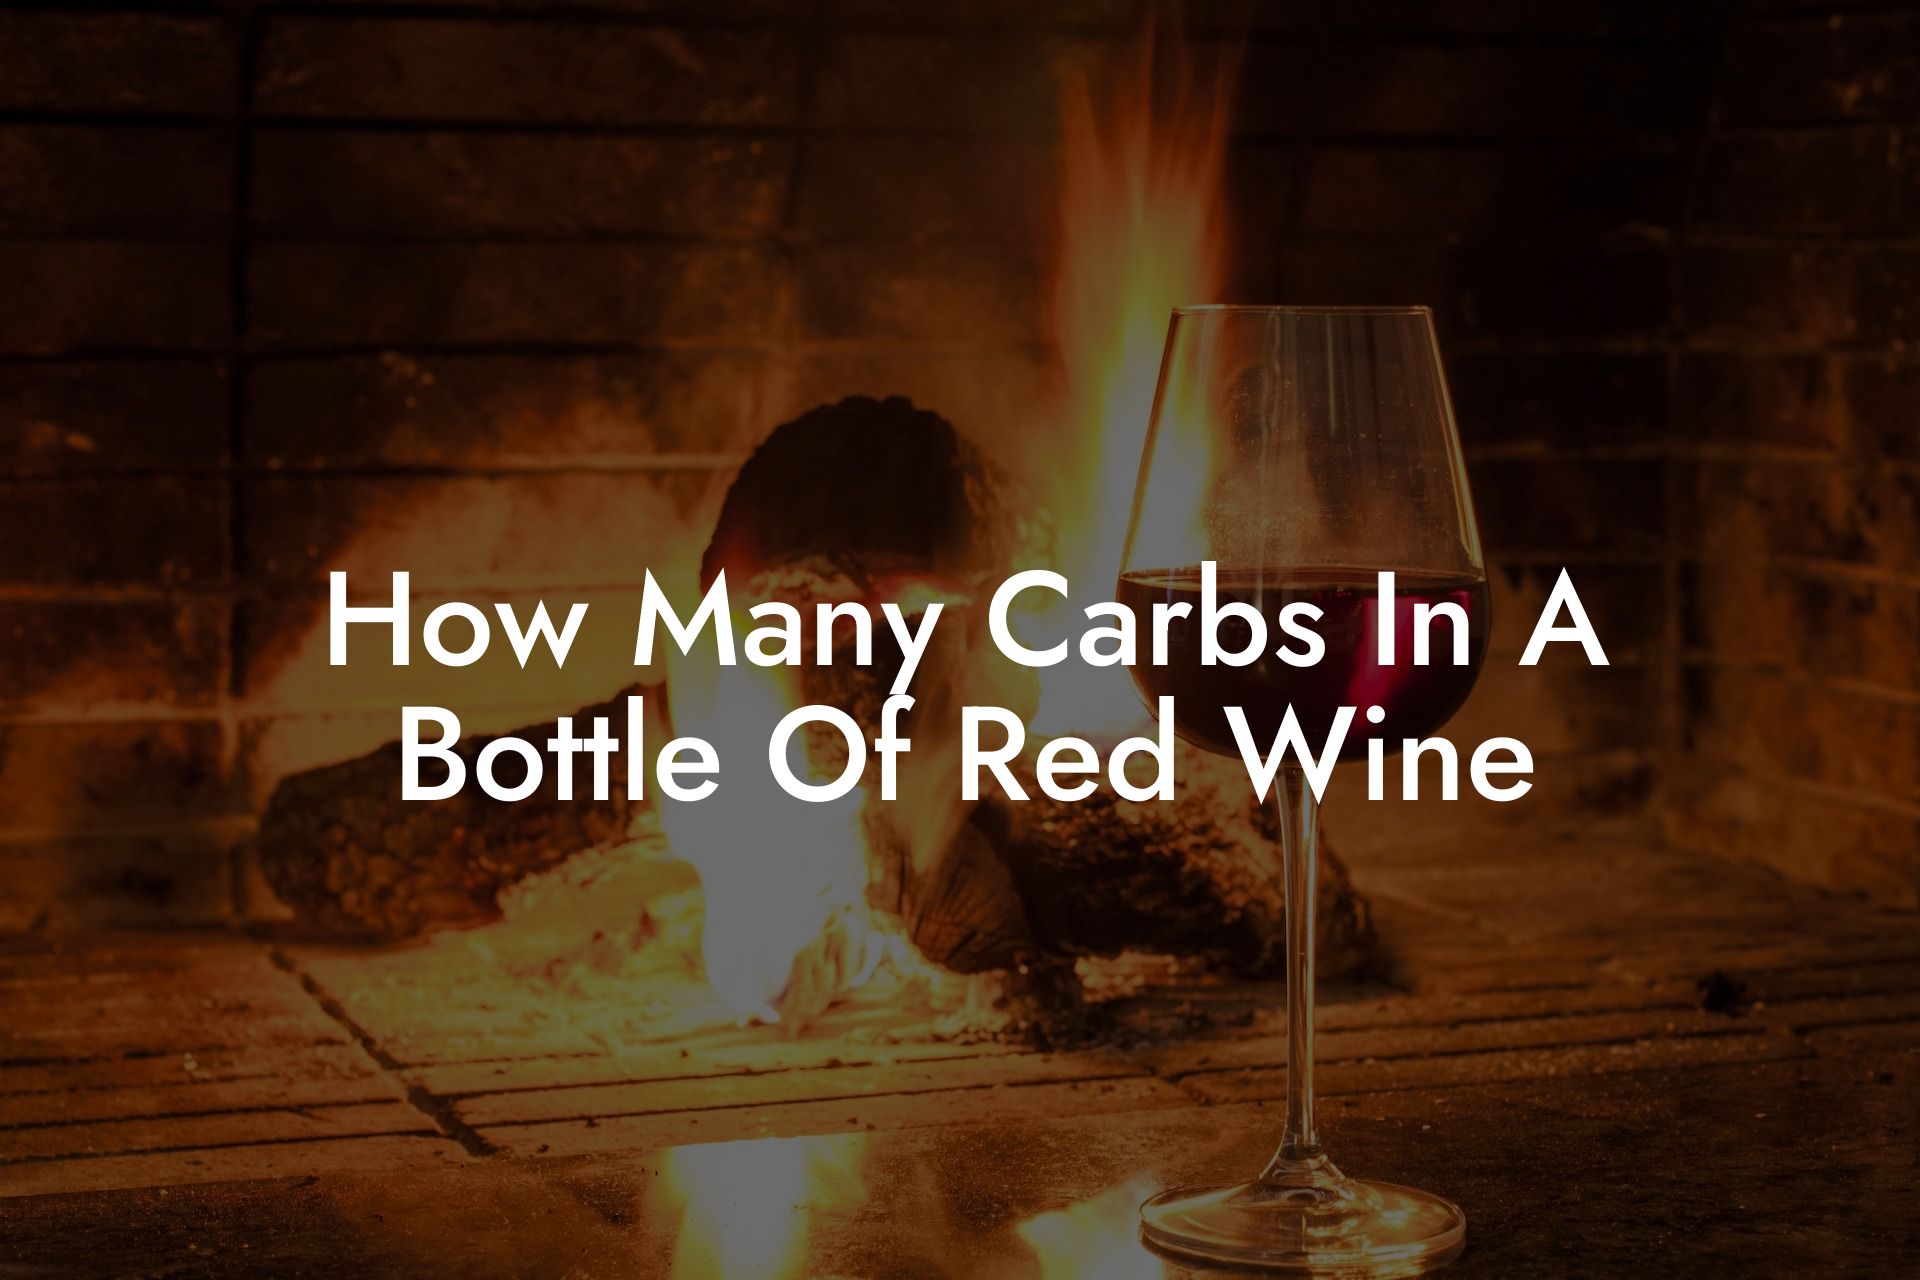 How Many Carbs In A Bottle Of Red Wine